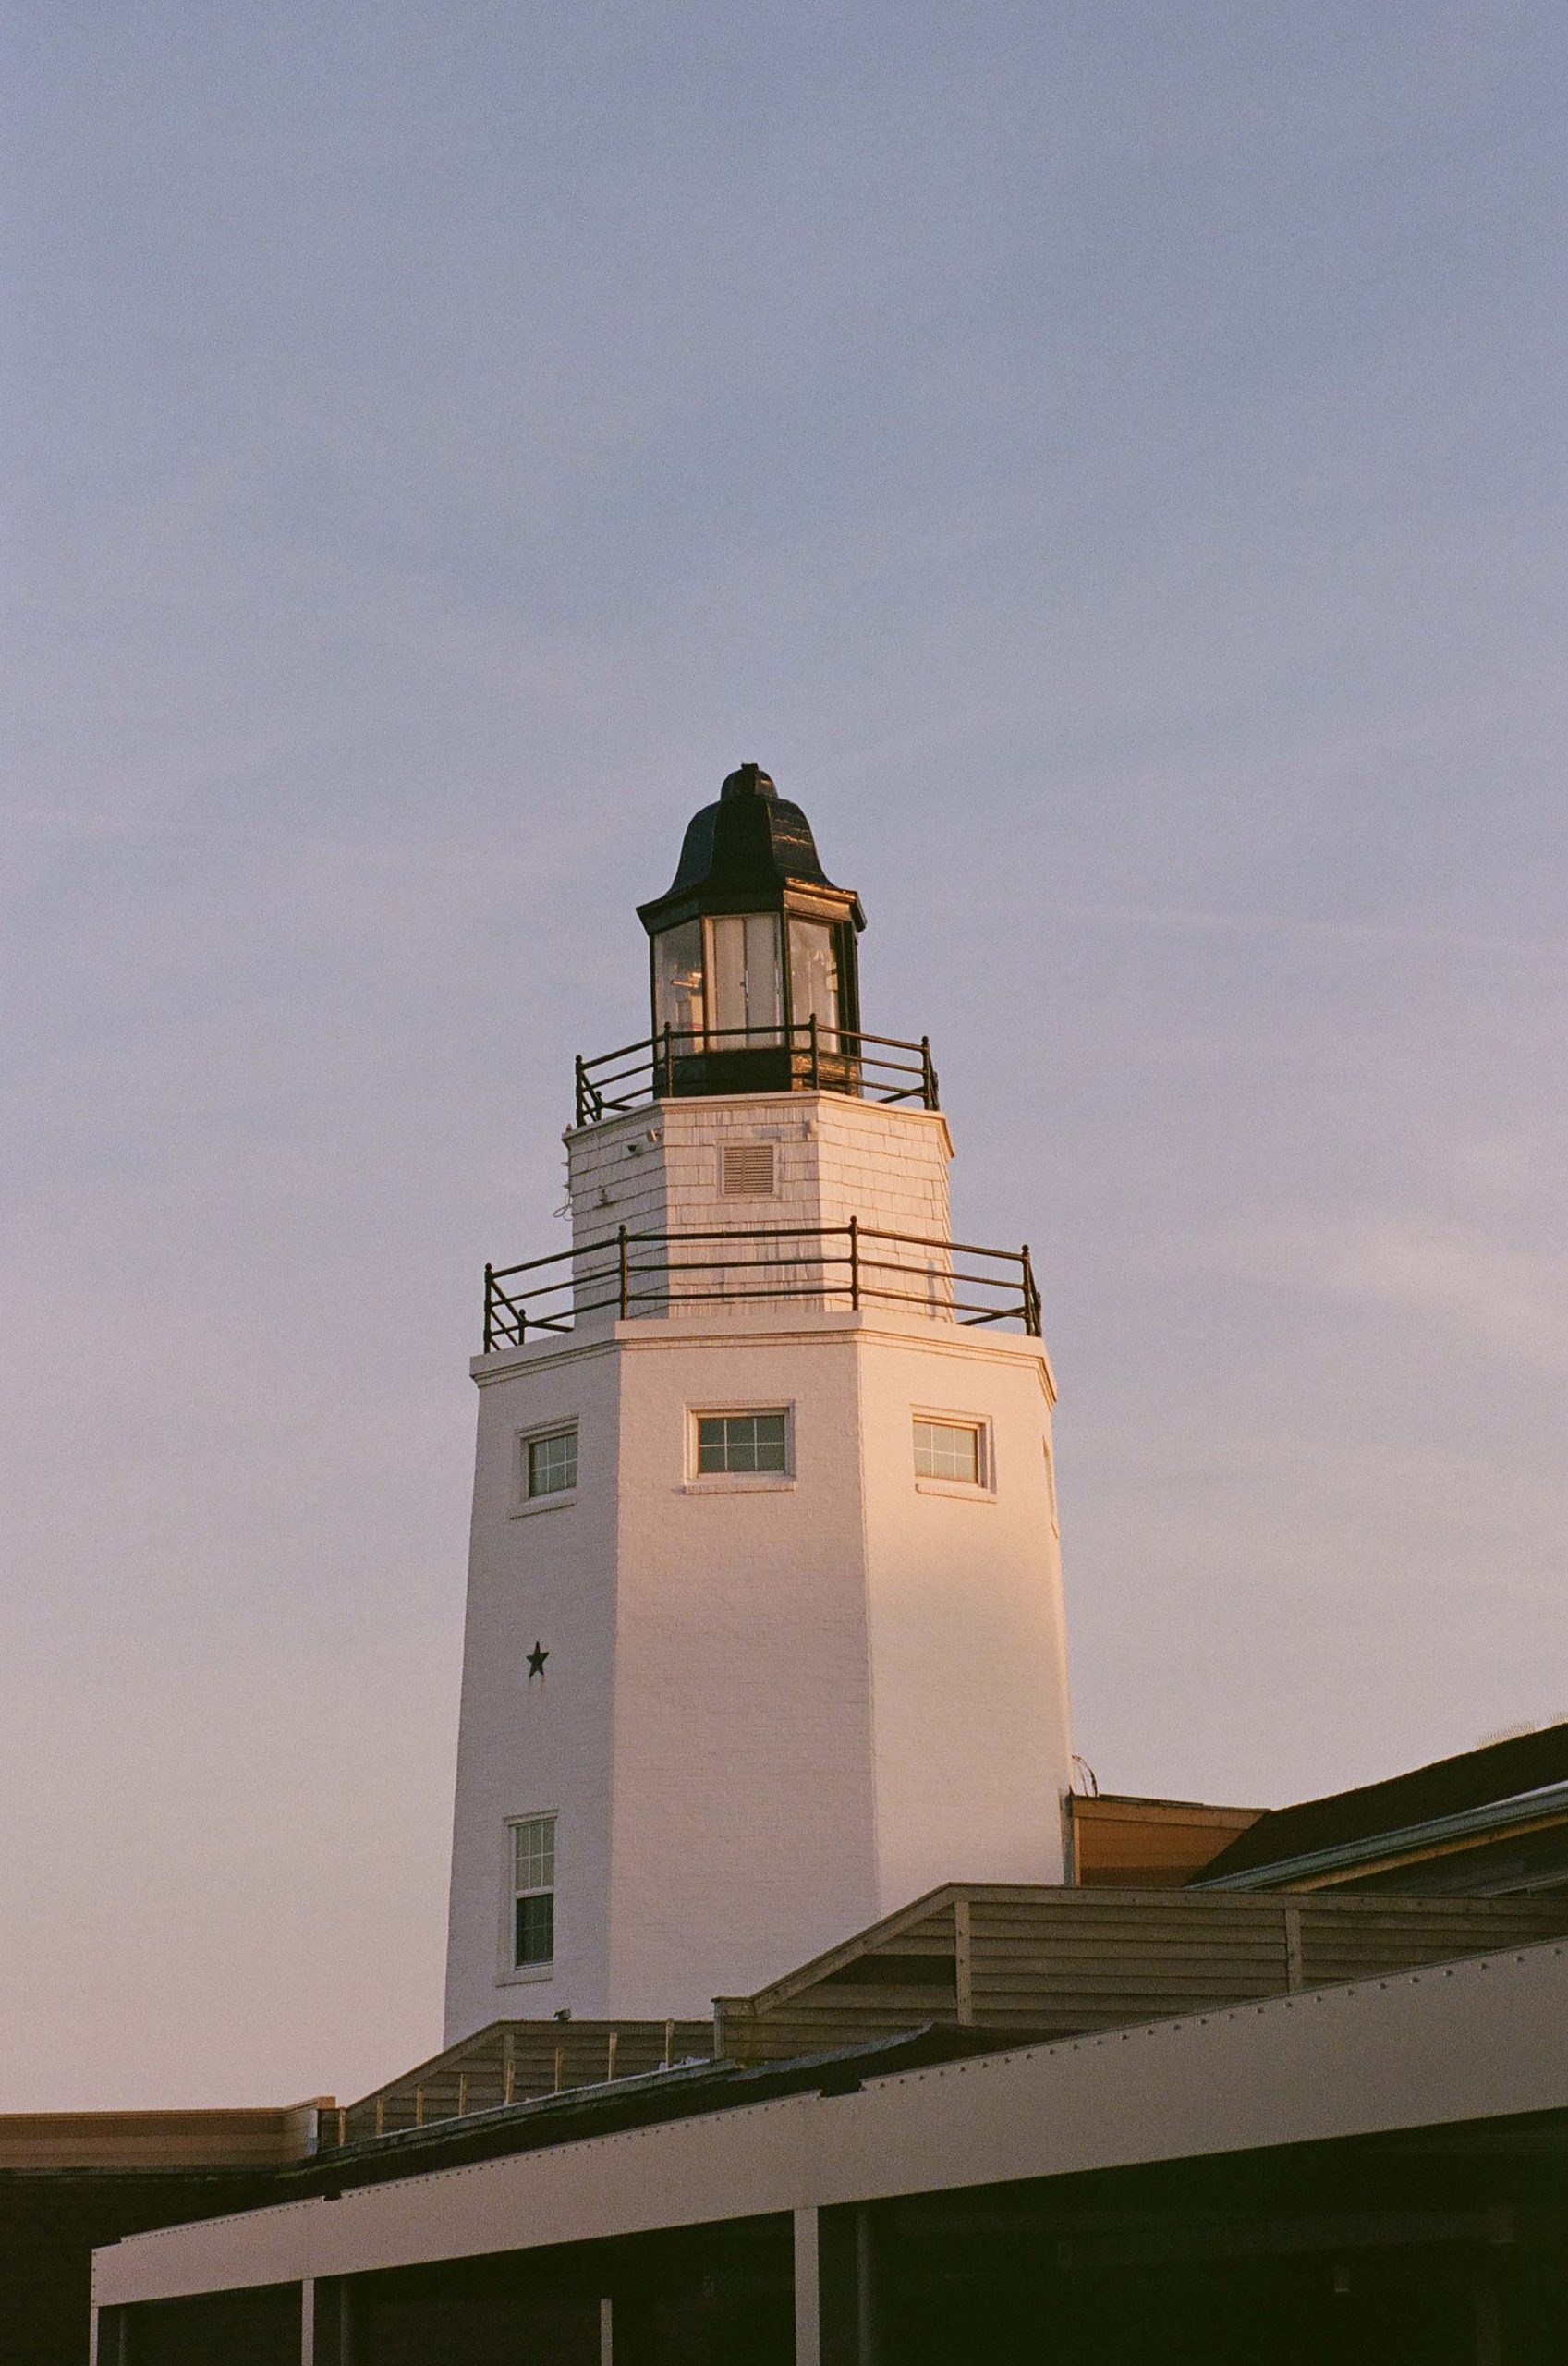 The top edge of a lighthouse glows with the rays of the sun.